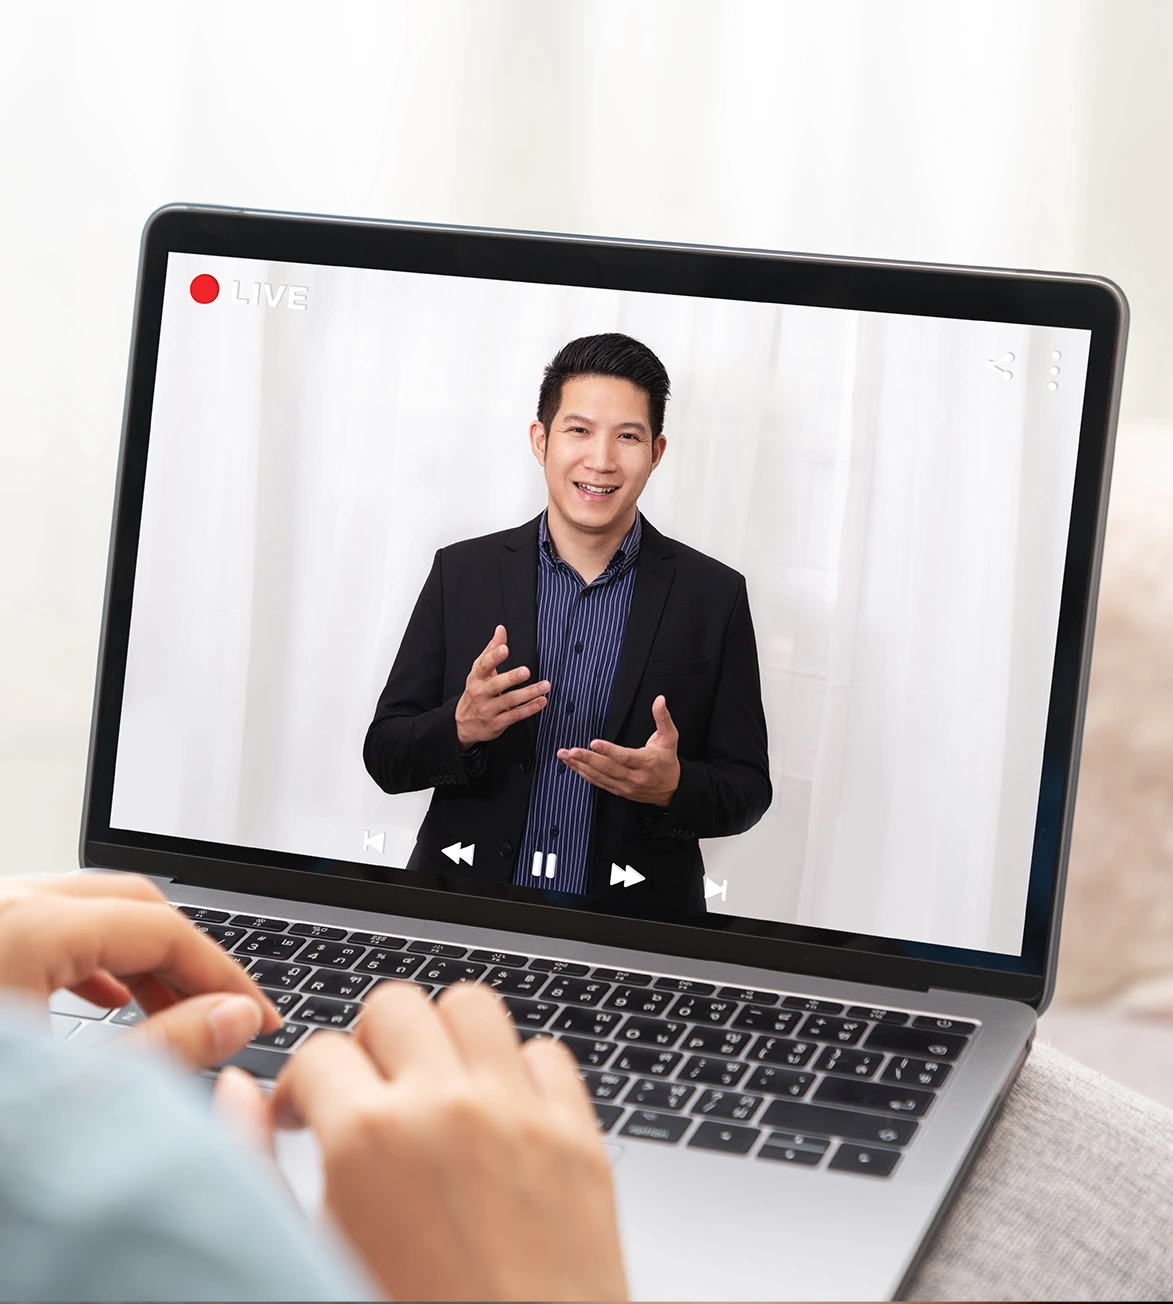 CEO conducting live video call